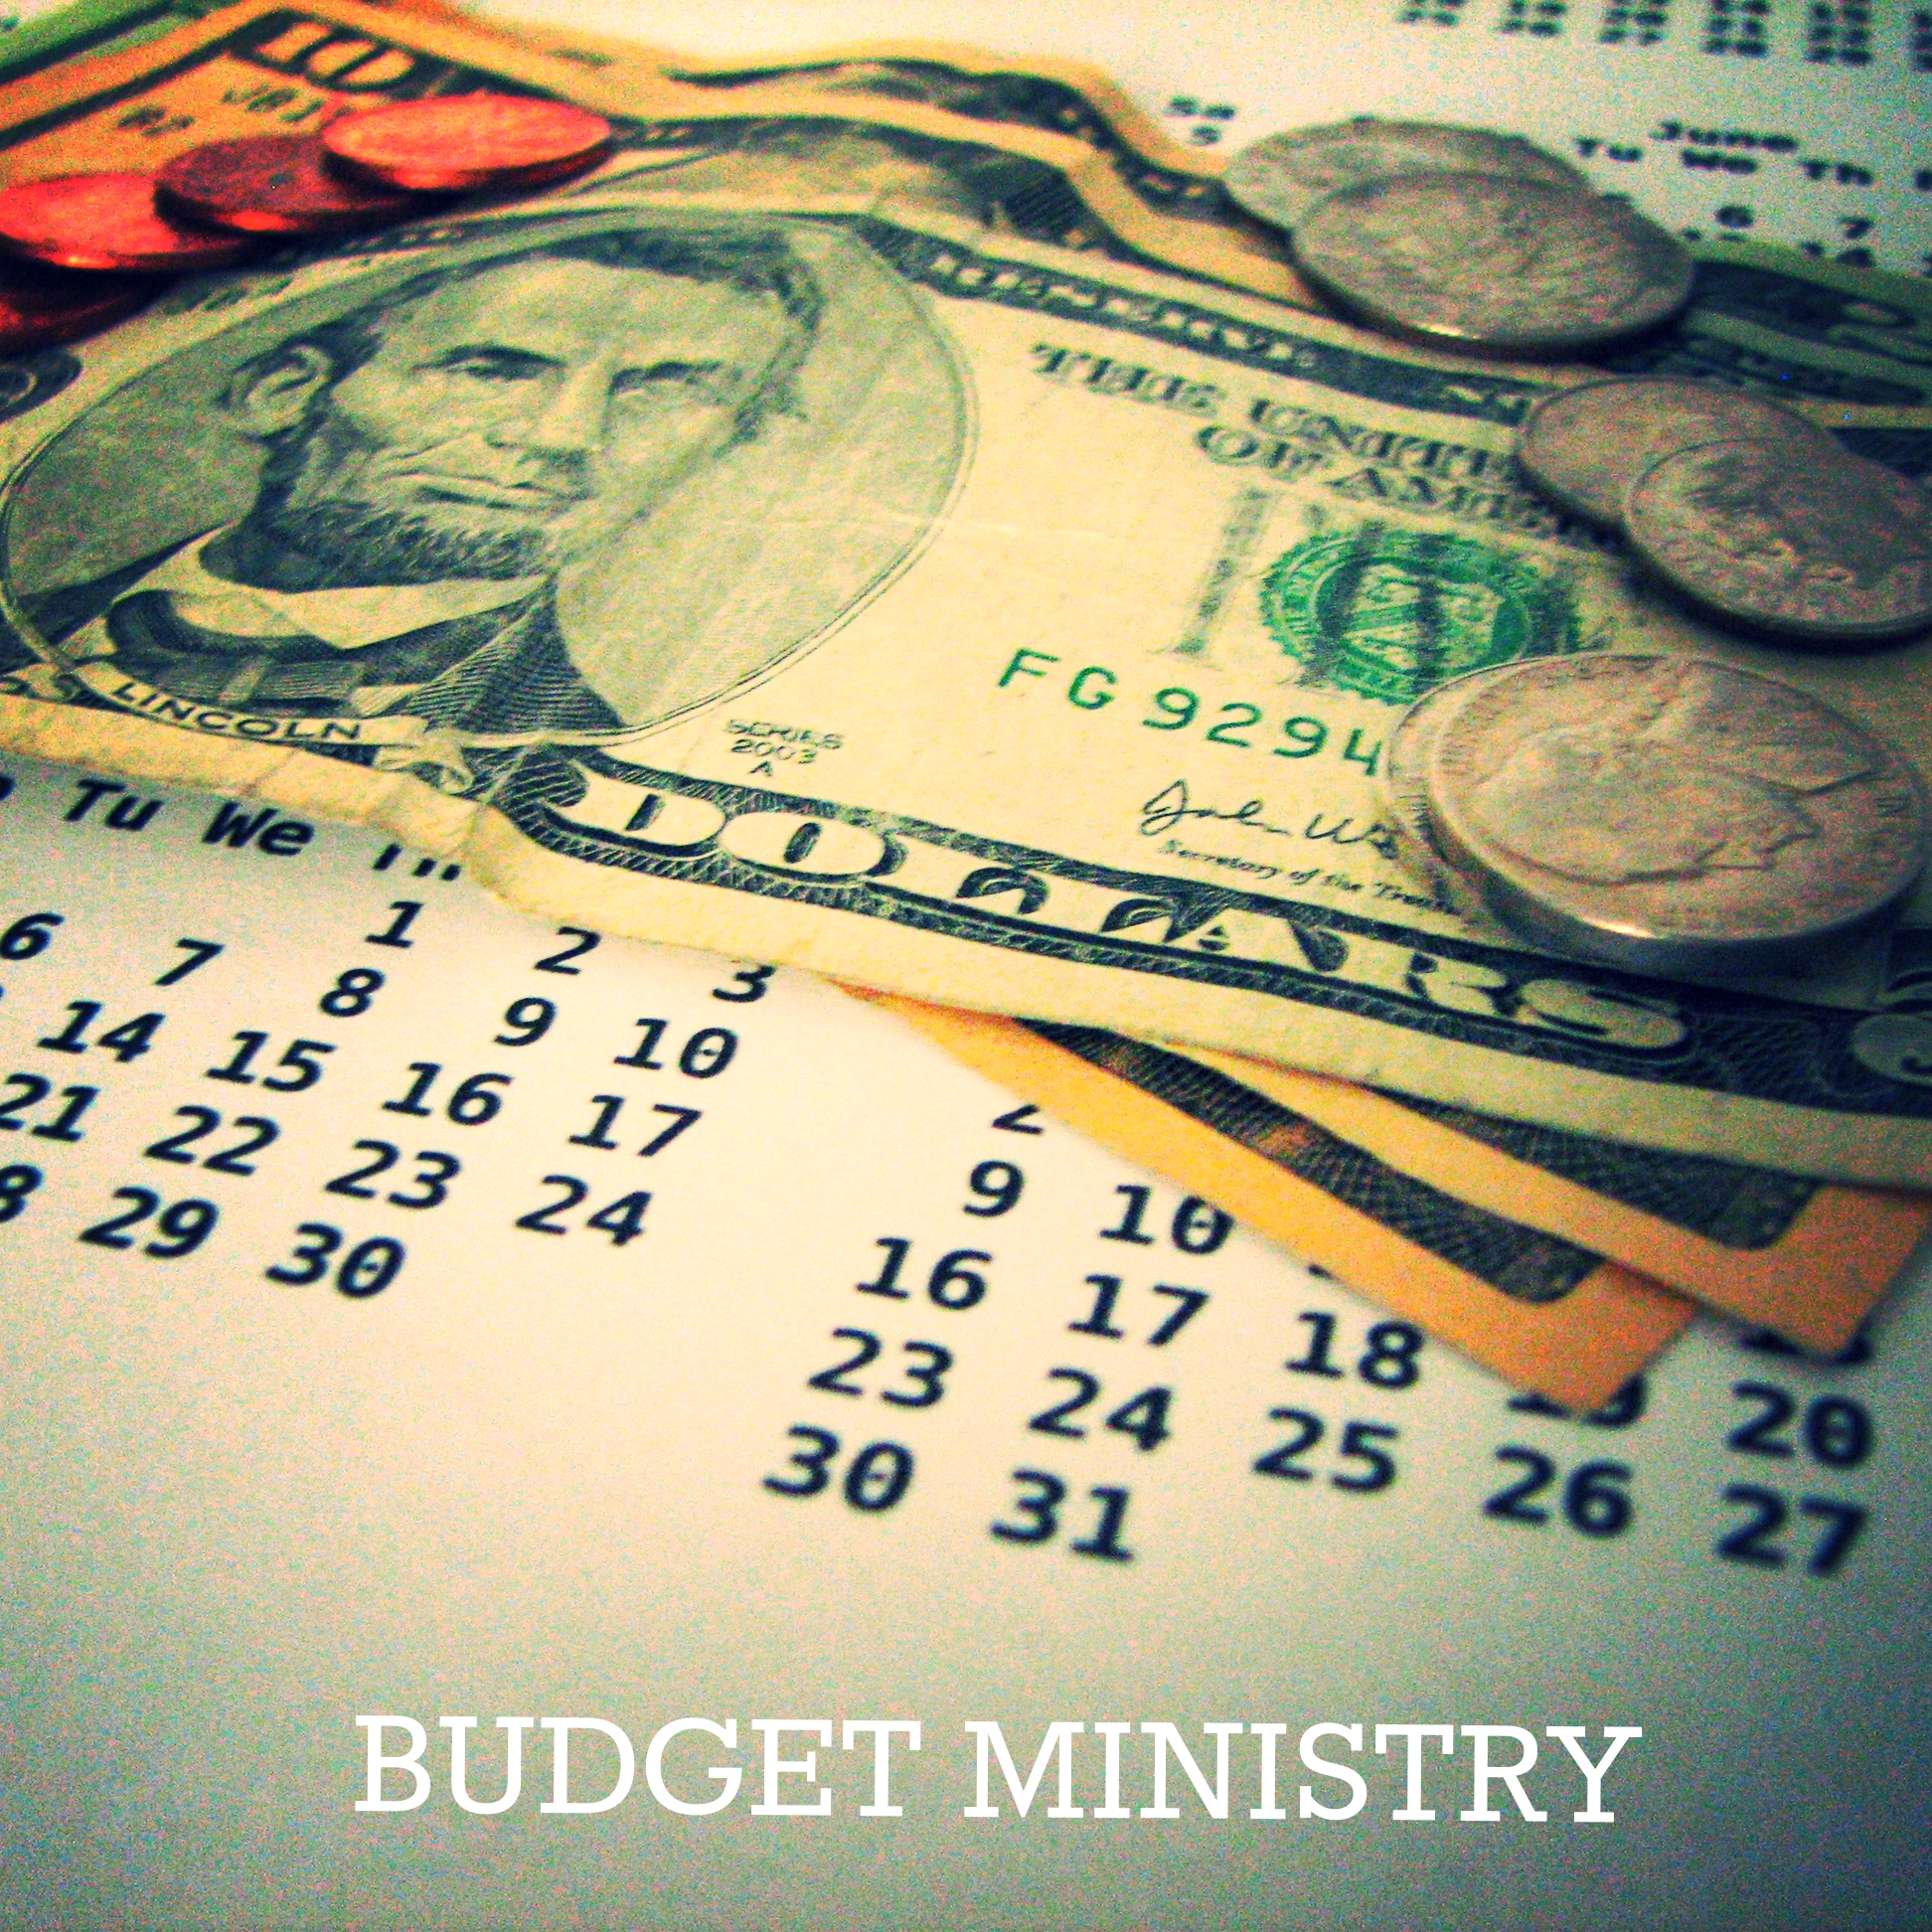 BUDGET MINISTRY